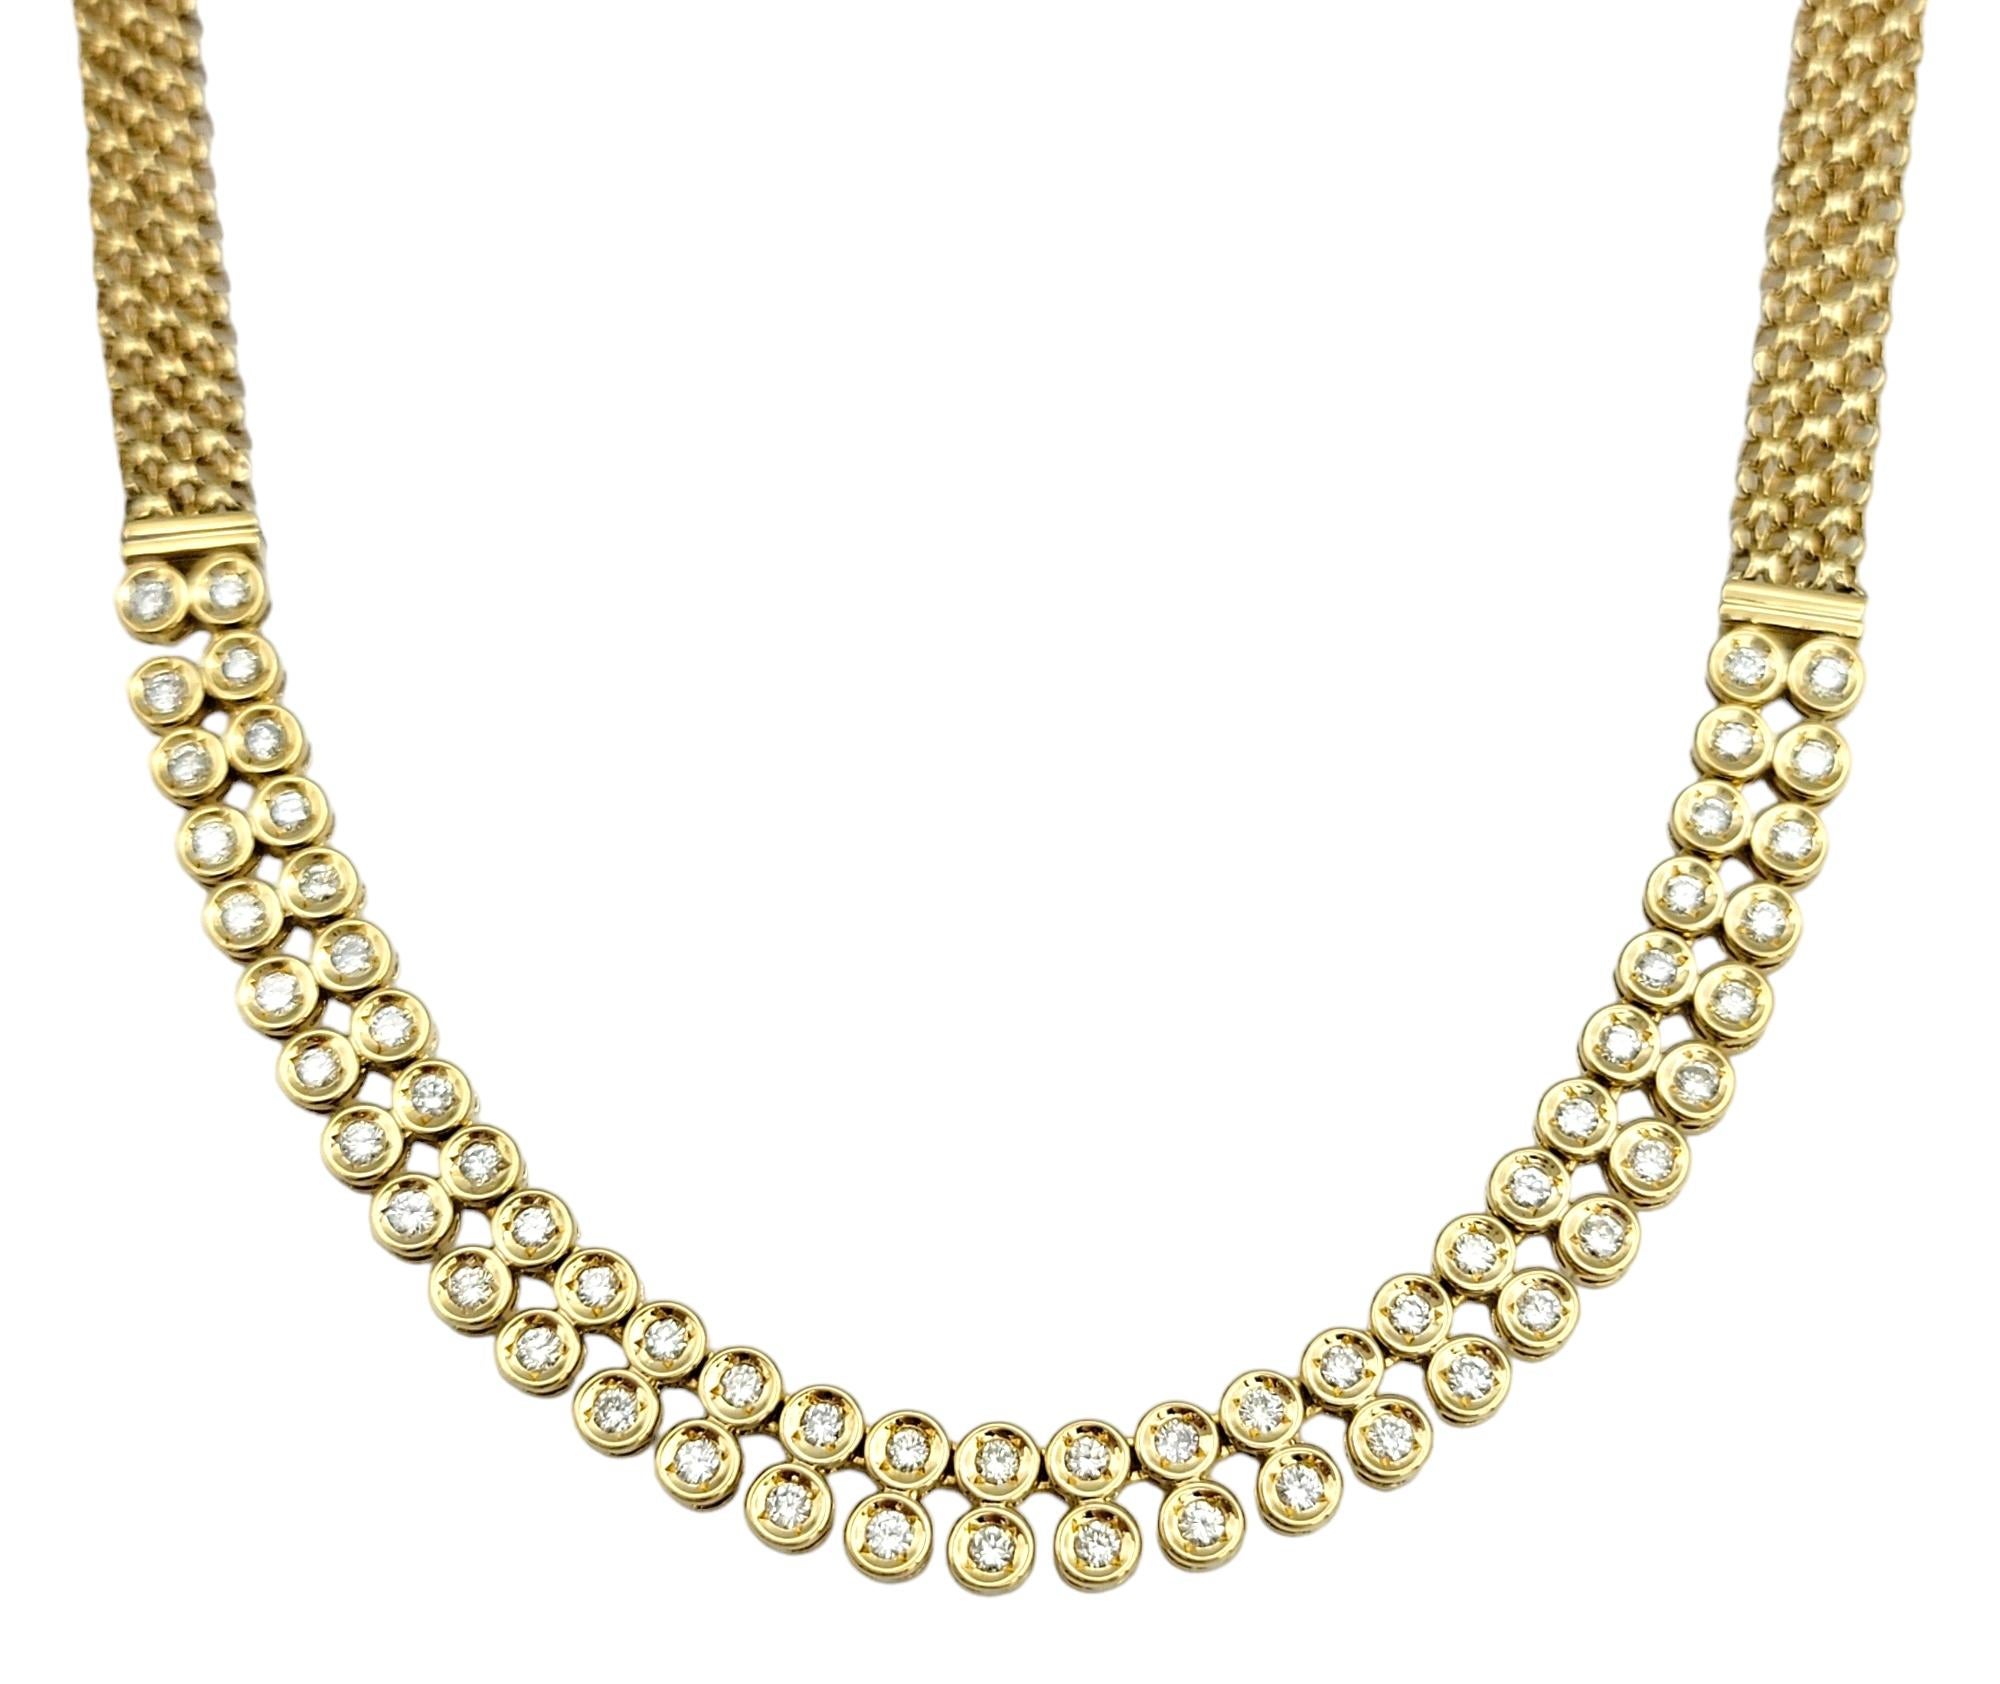 Contemporary 18 Karat Yellow Gold Woven Link Necklace with Bezel Set Diamond Circle Motif  For Sale